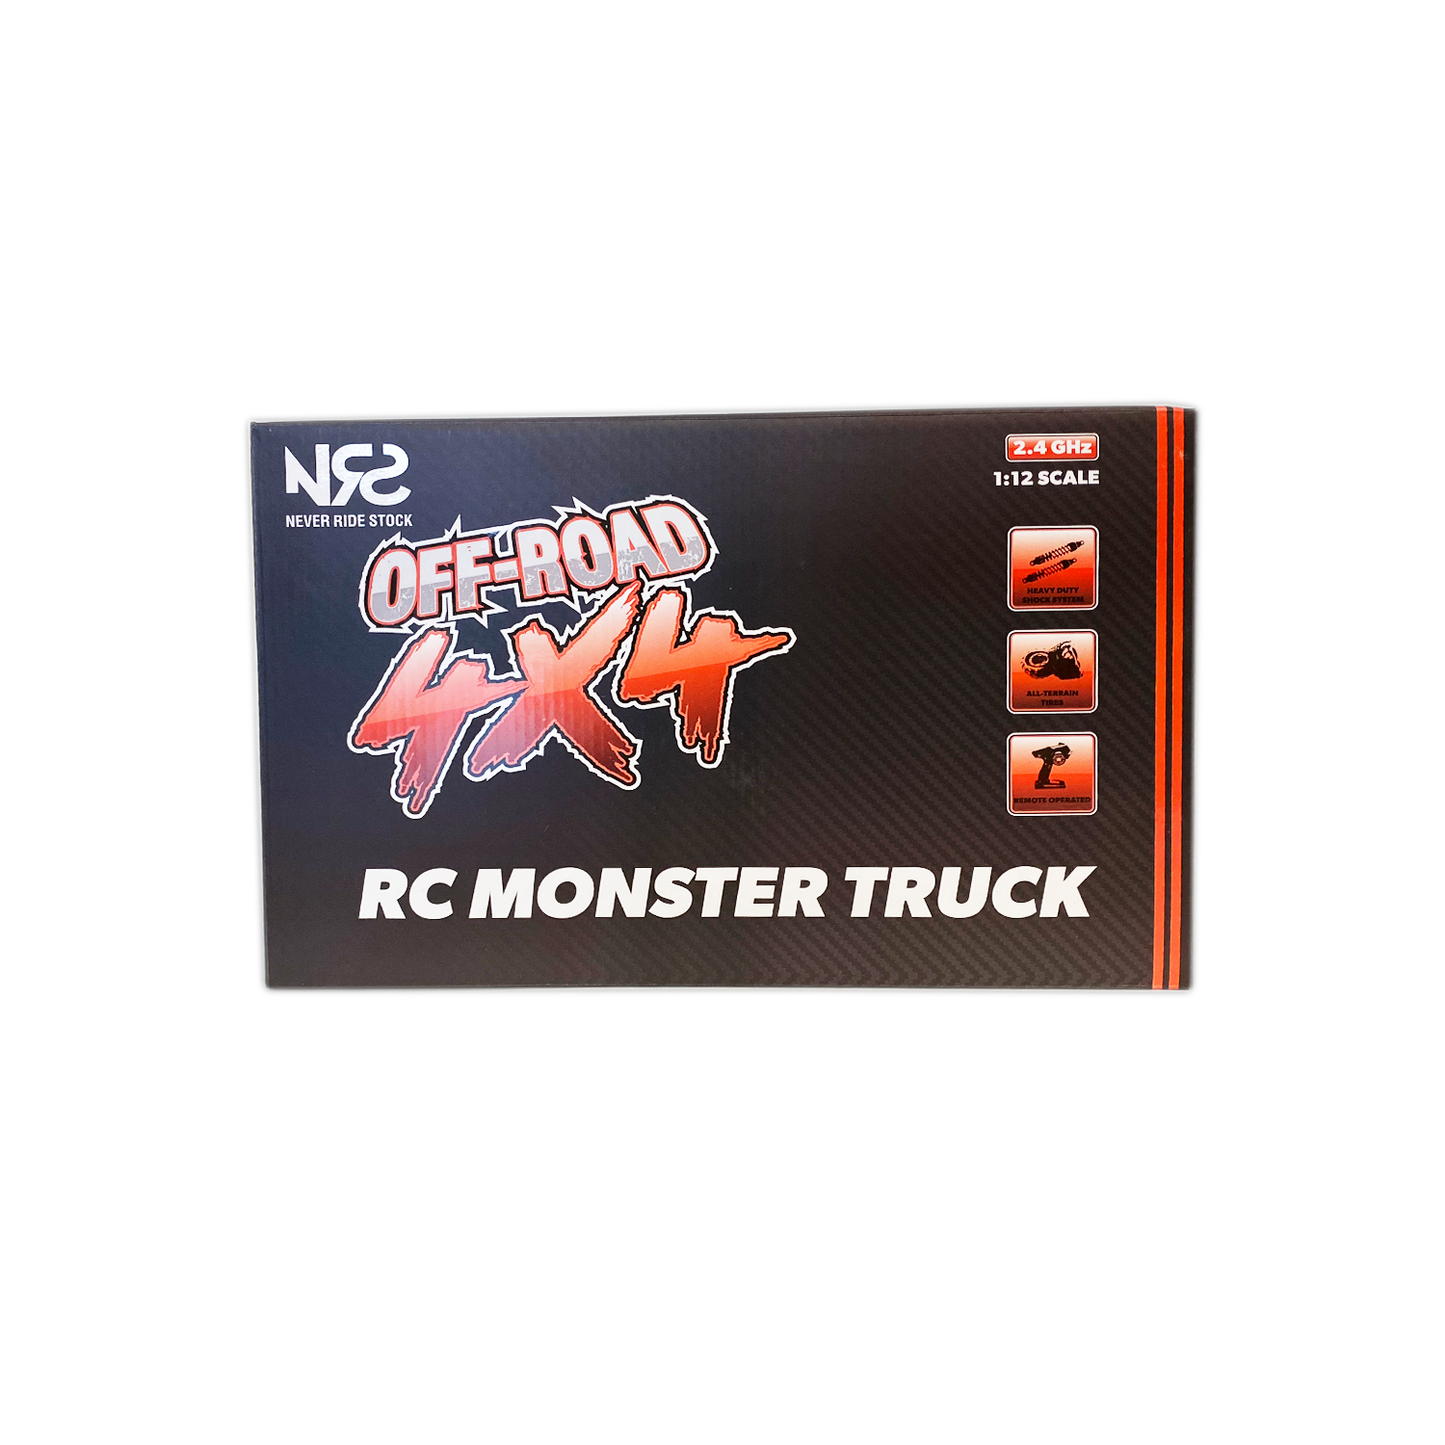 NRS Offroad 4x4 RC Truck